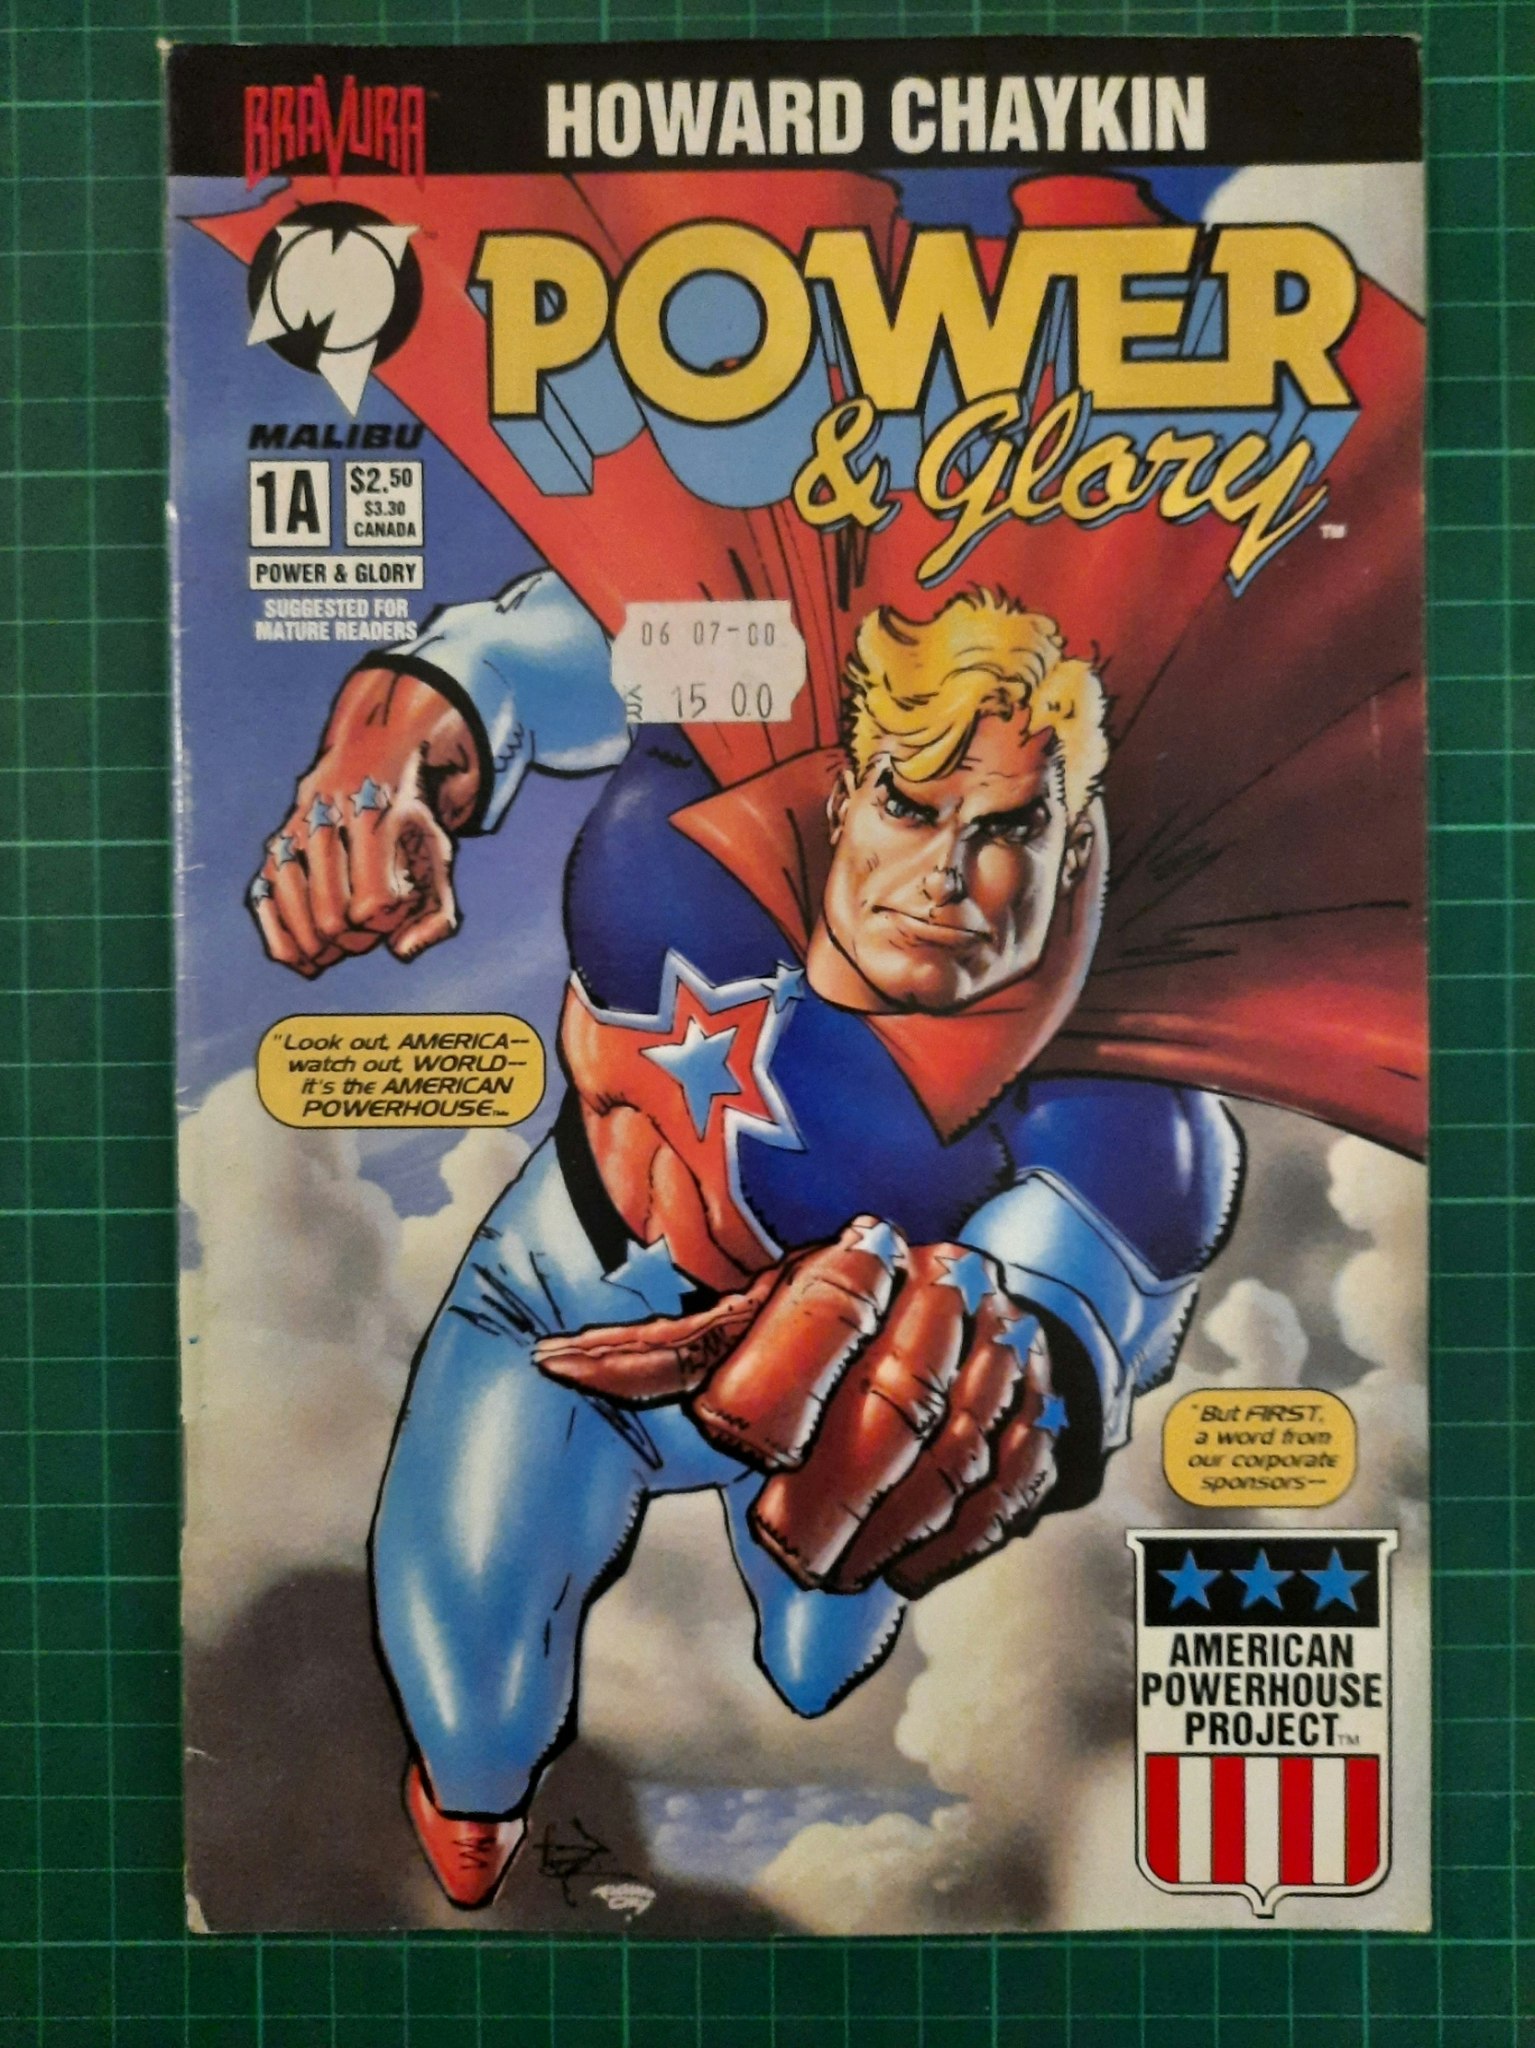 Power and glory #1A